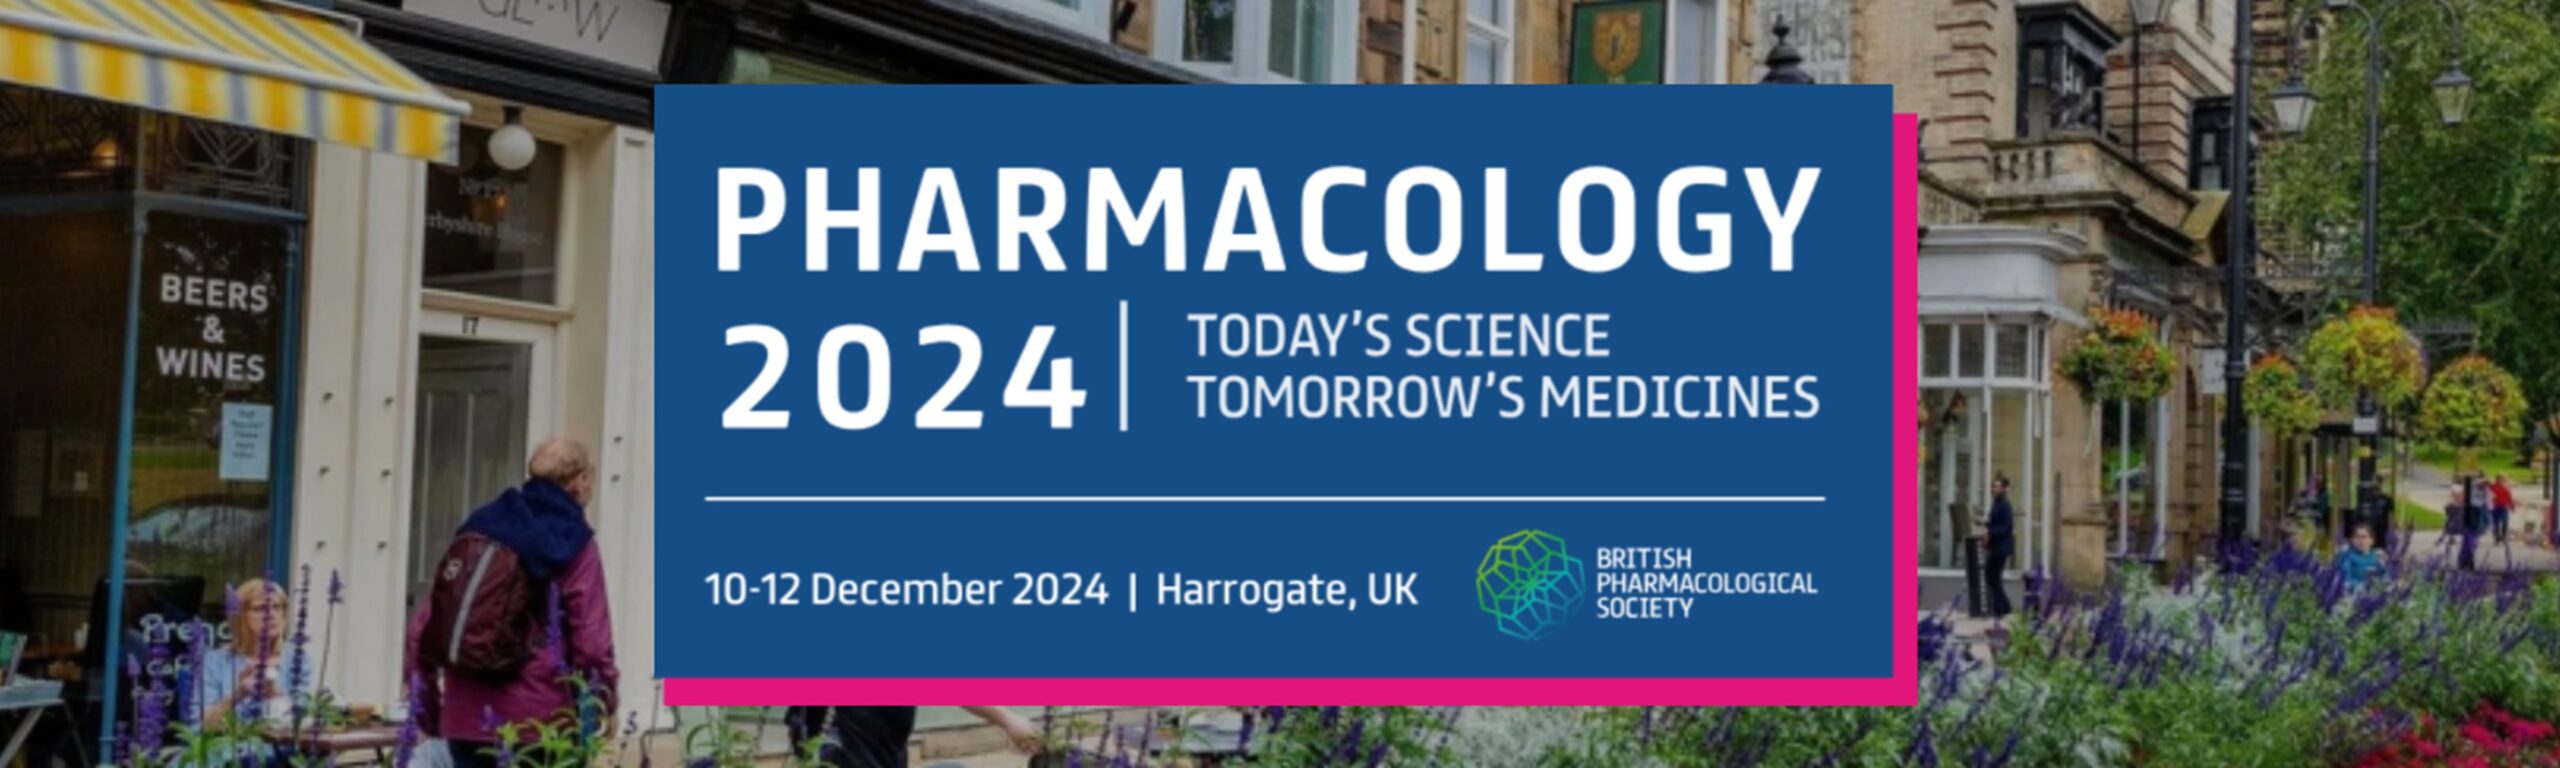 The British Pharmacological Society’s annual Pharmacology meeting